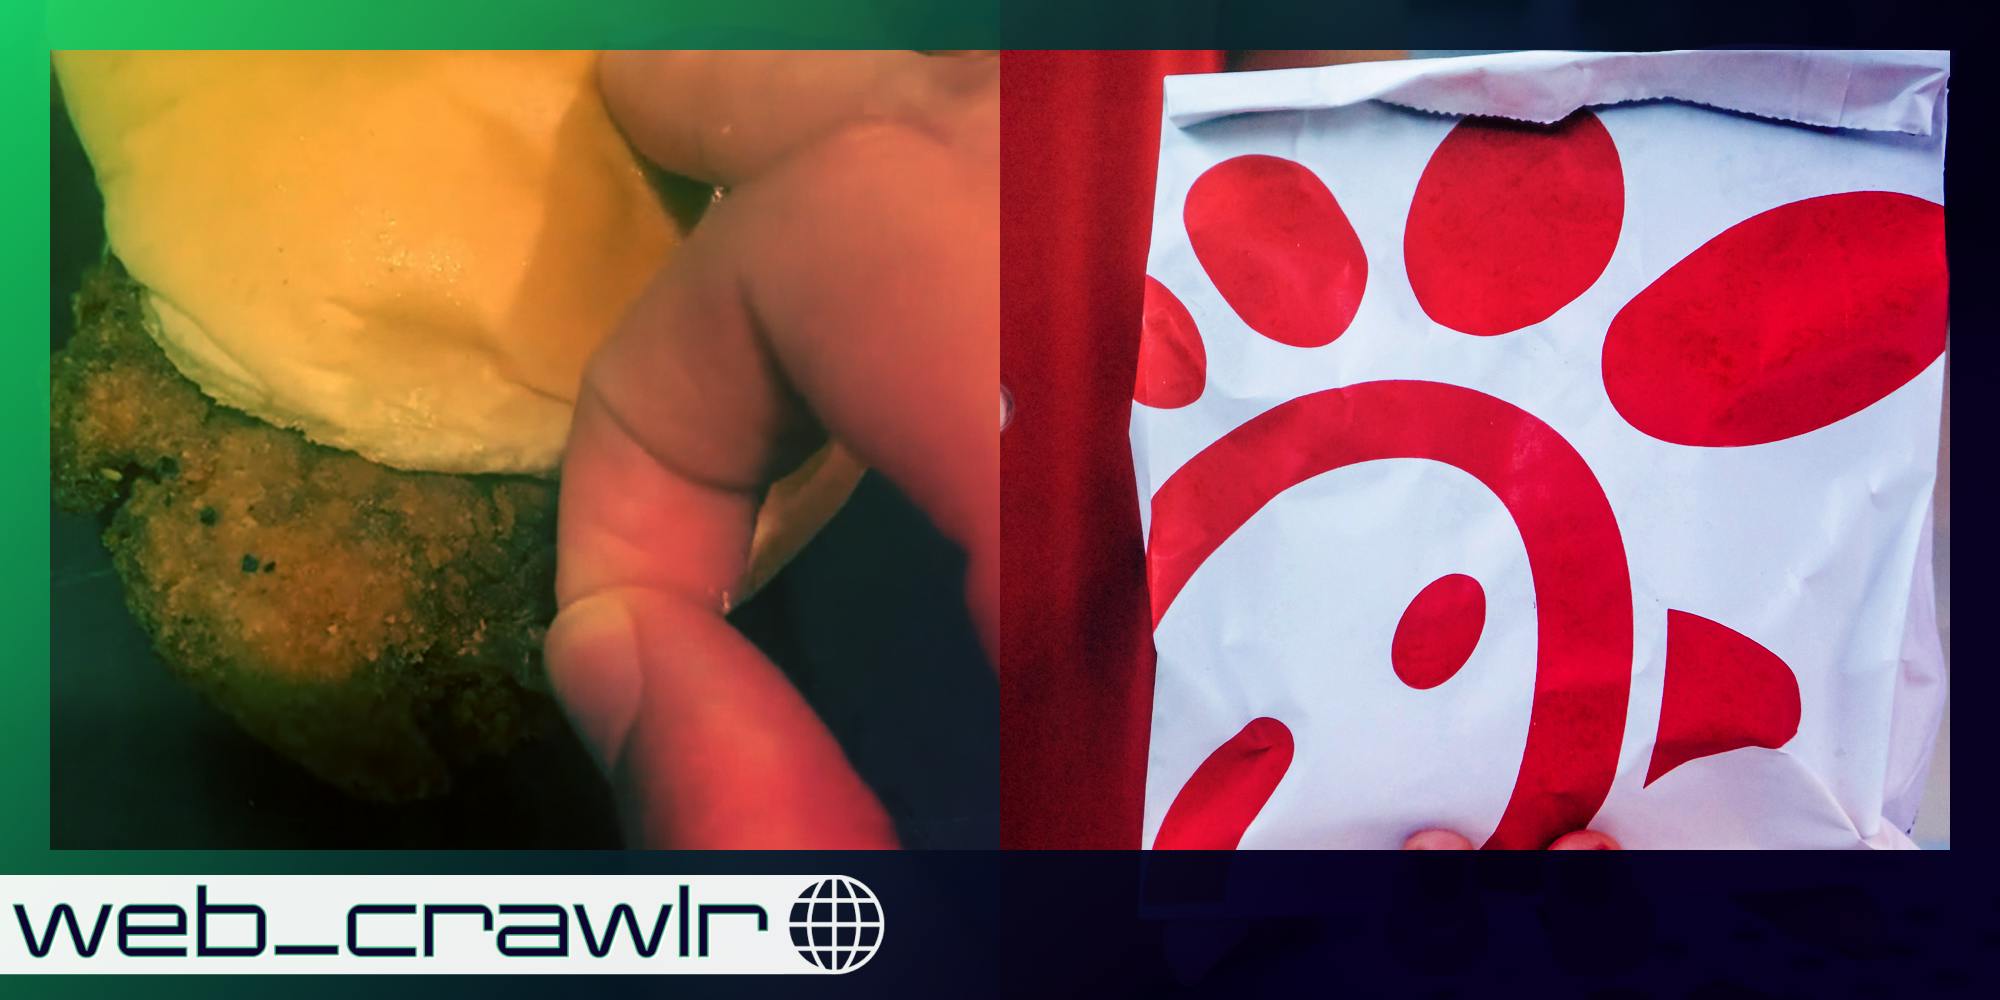 A person poking at a chicken sandwich next to a Chic-fil-A bag. The Daily Dot newsletter web_crawlr logo is in the bottom left corner.